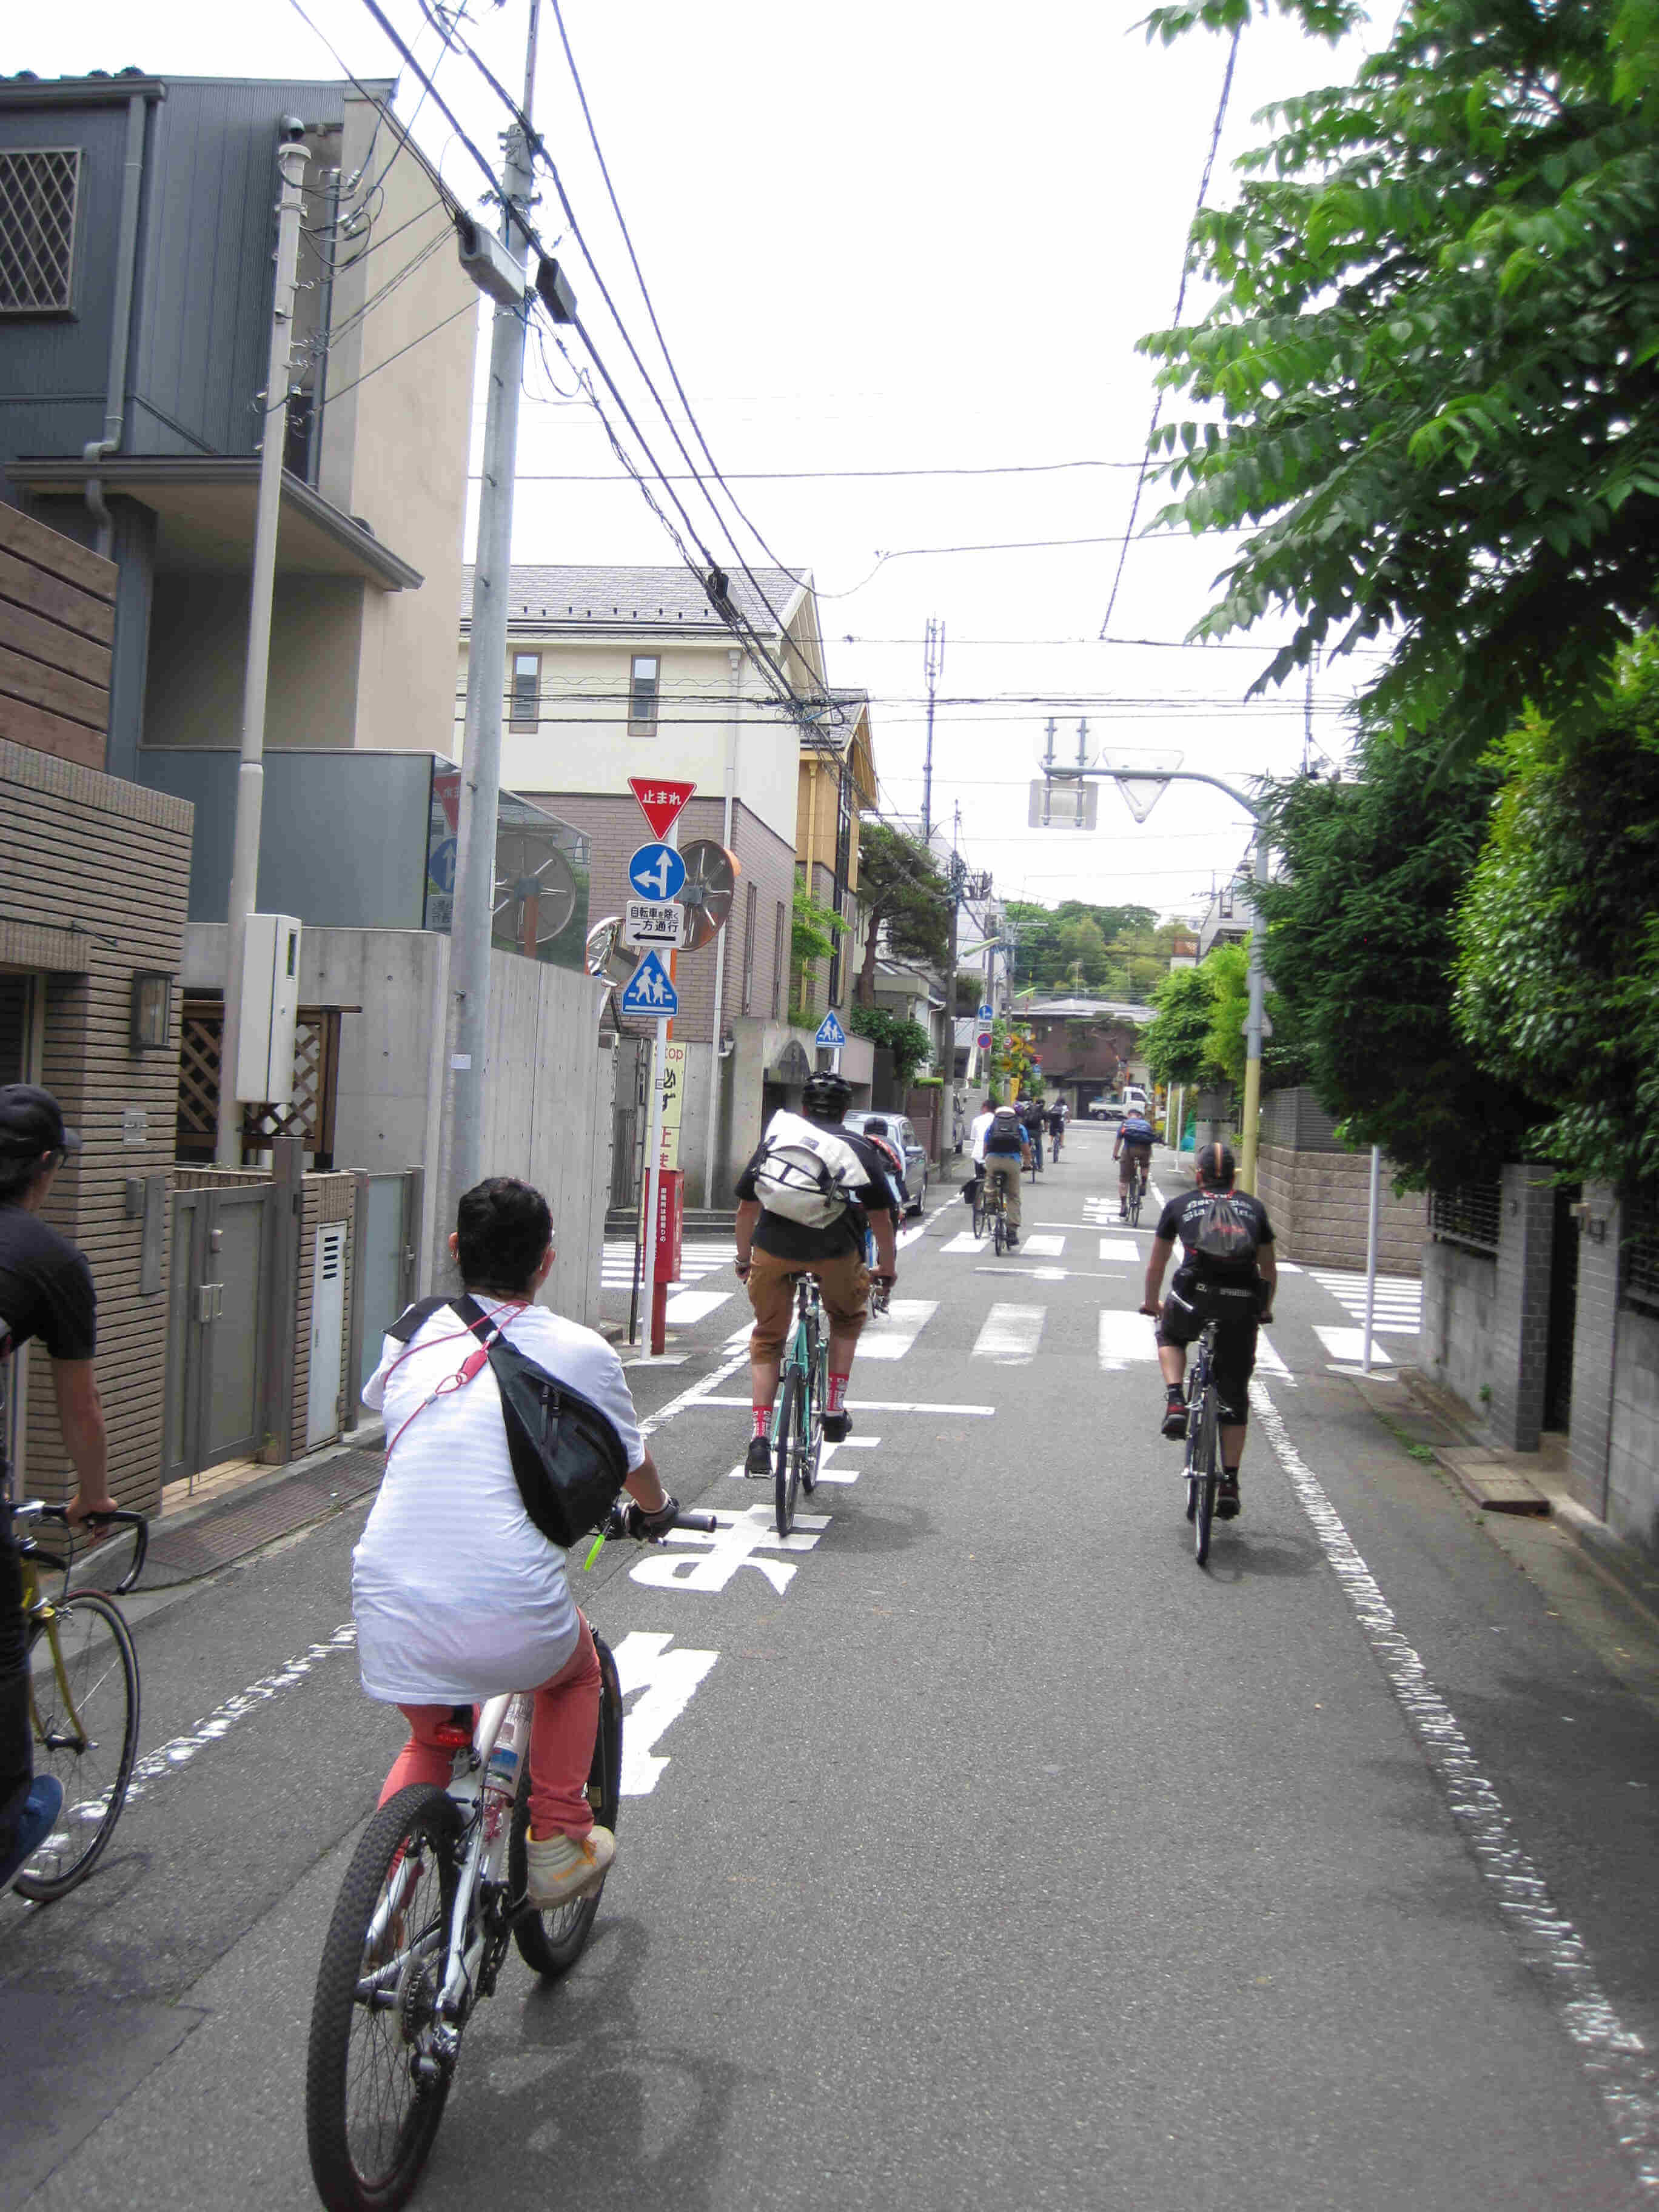 Rear view of a cyclist group riding their bikes down a city street, with buildings on the right, and trees on the left